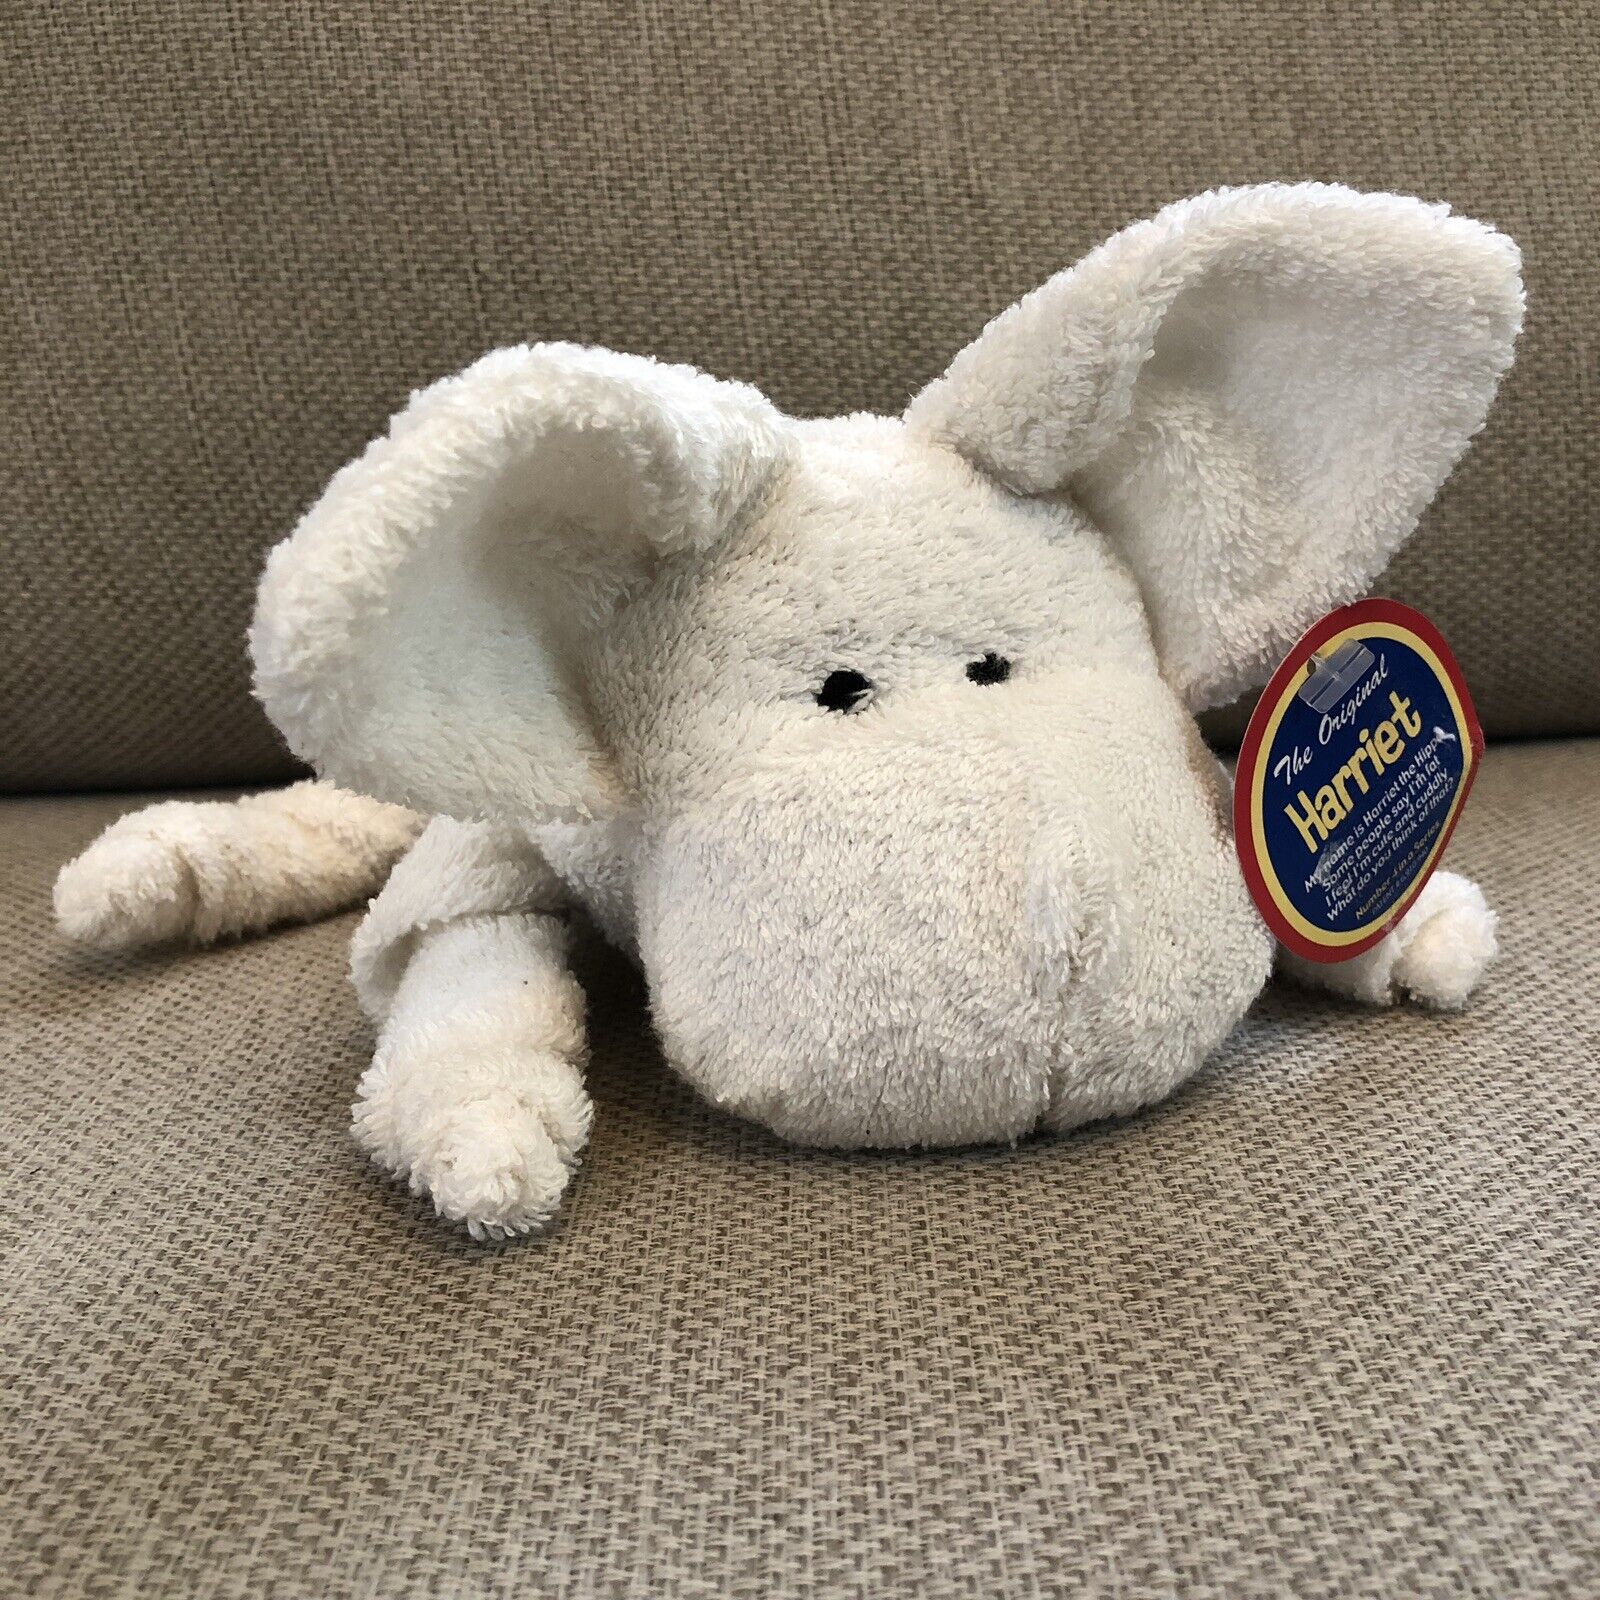 Carnival Cruise Towel Pals Harriet the Hippo White Terry Wash Cloth Stuffed  Toy | eBay